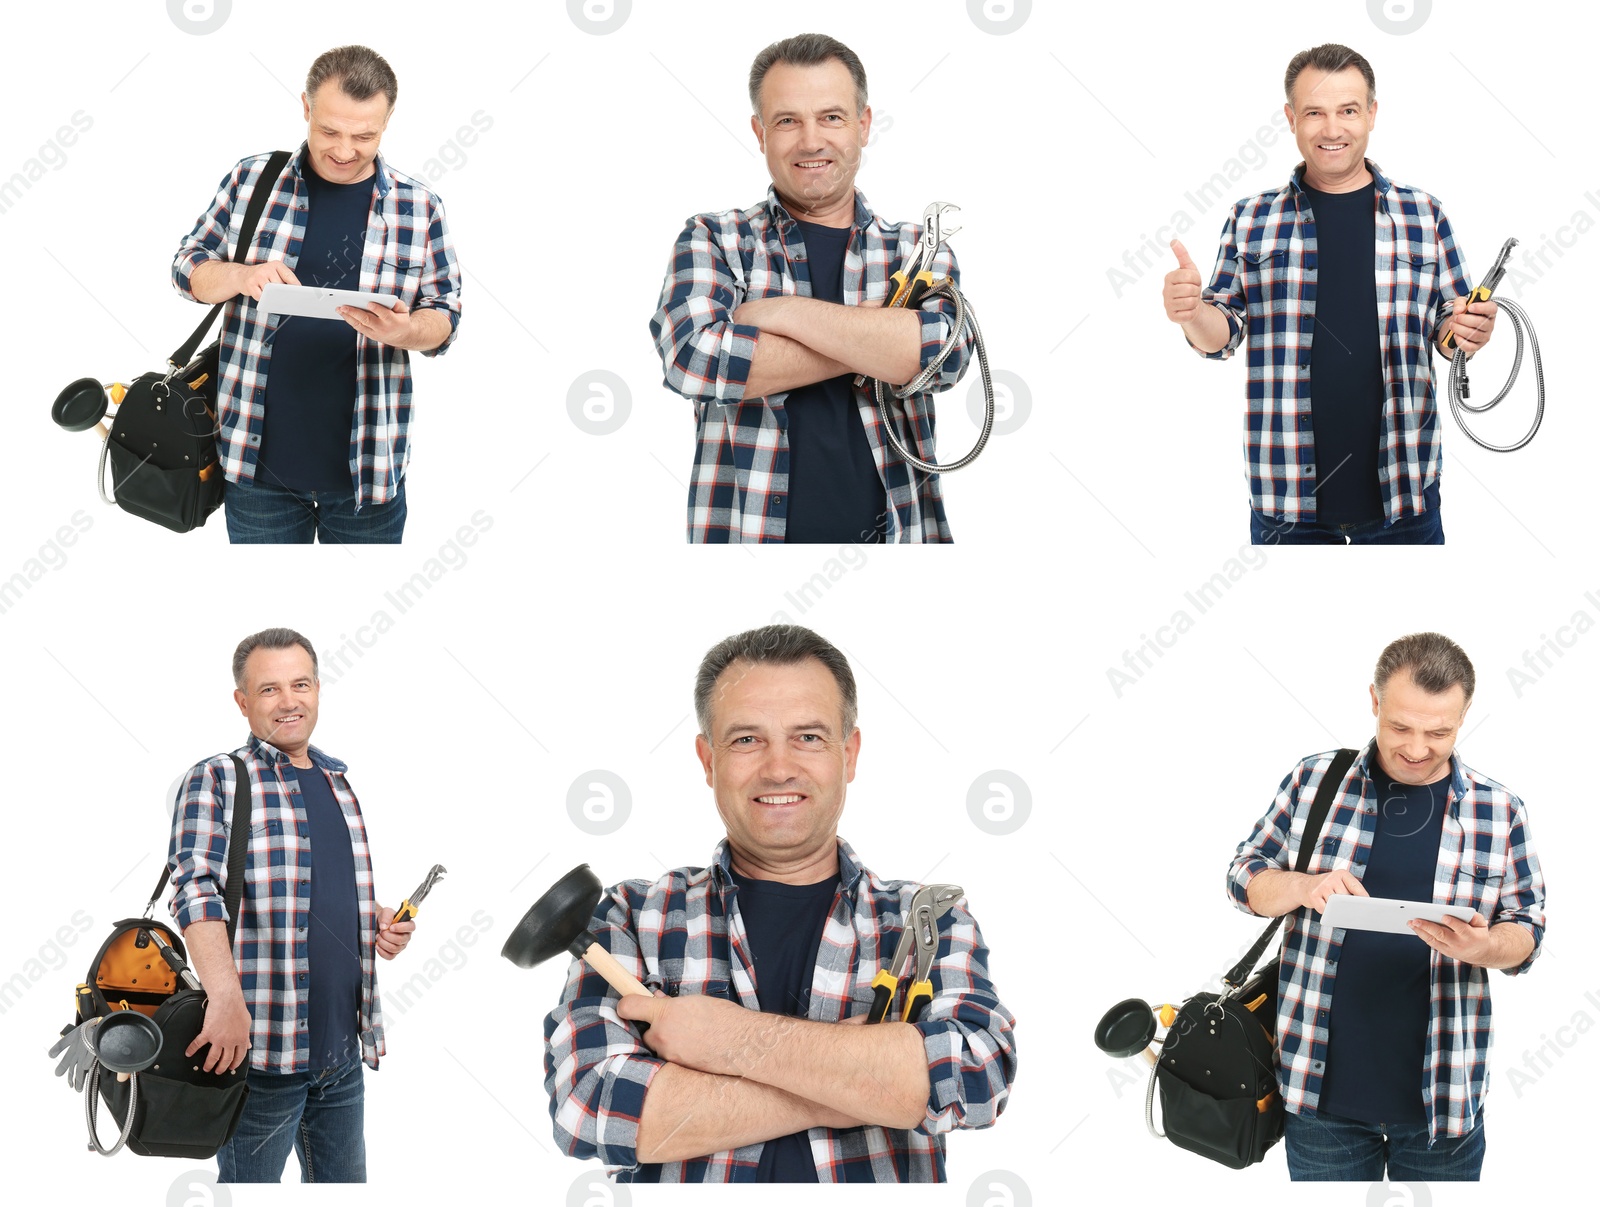 Image of Collage with photos of mature plumber on white background